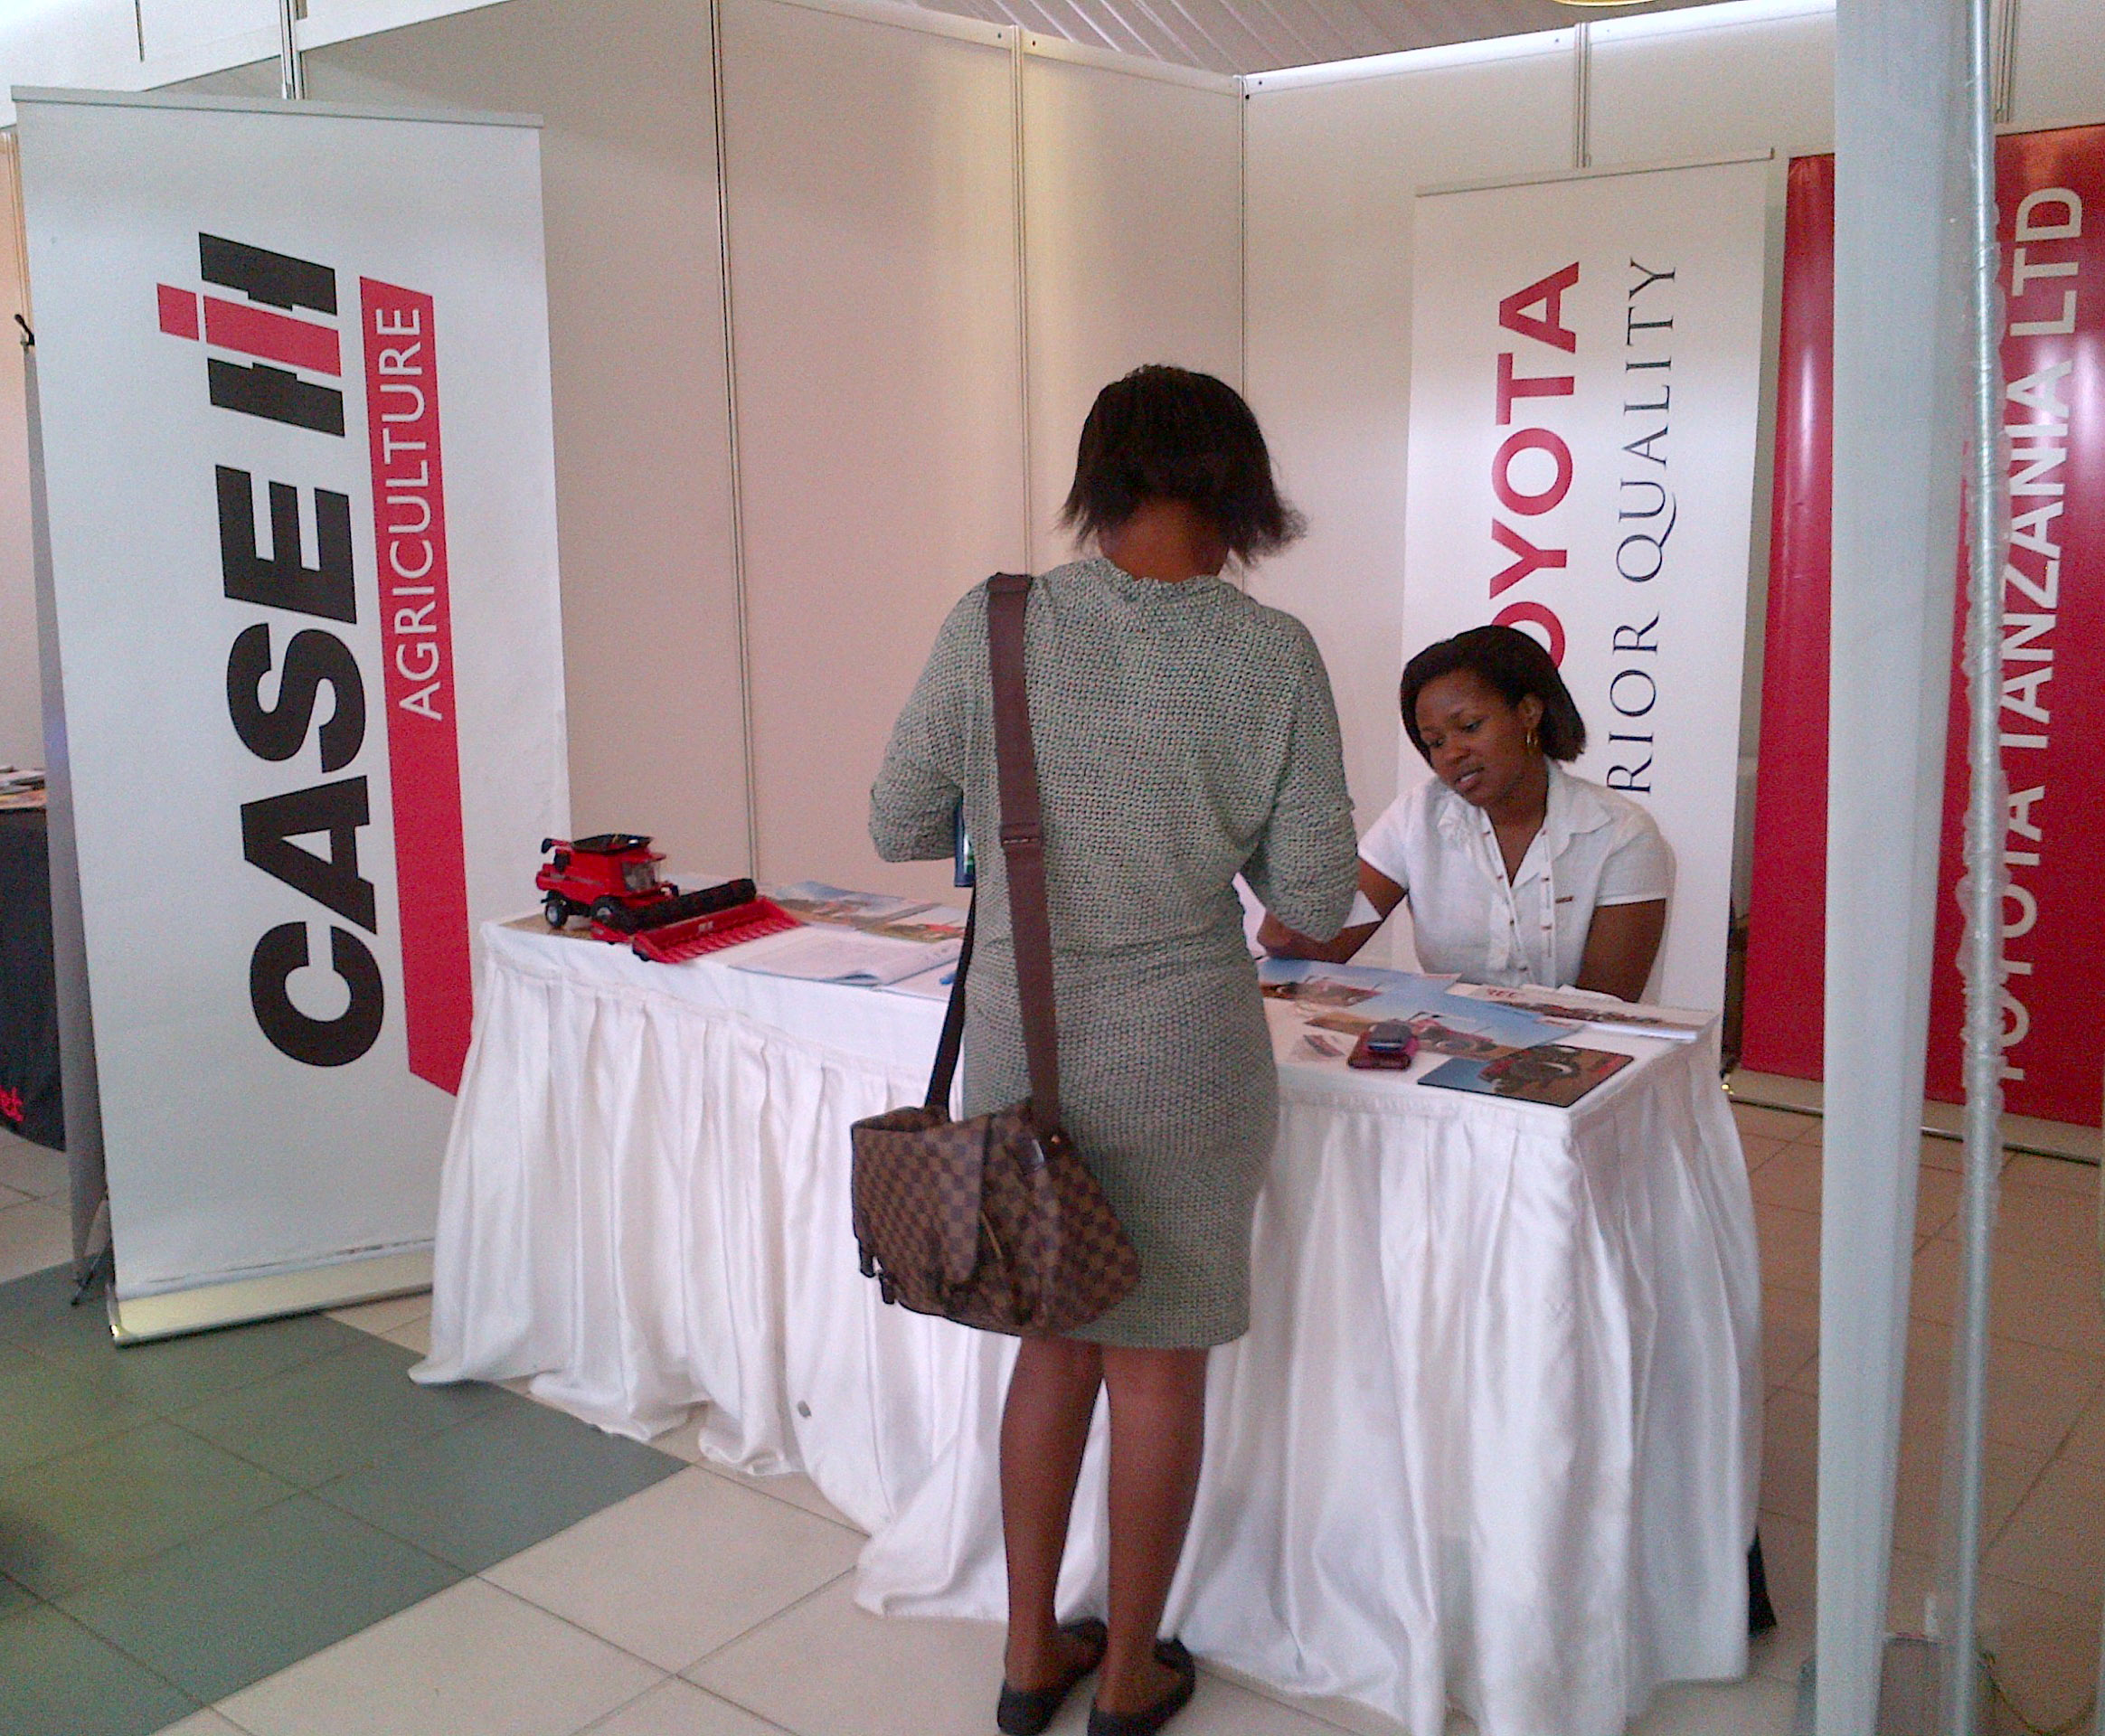 CASE IH SPONSORS THE AGRIBUSINESS CONGRESS EAST AFRICA IN TANZANIA TO SUPPORT THE REGIONS AGRICULTURAL GROWTH